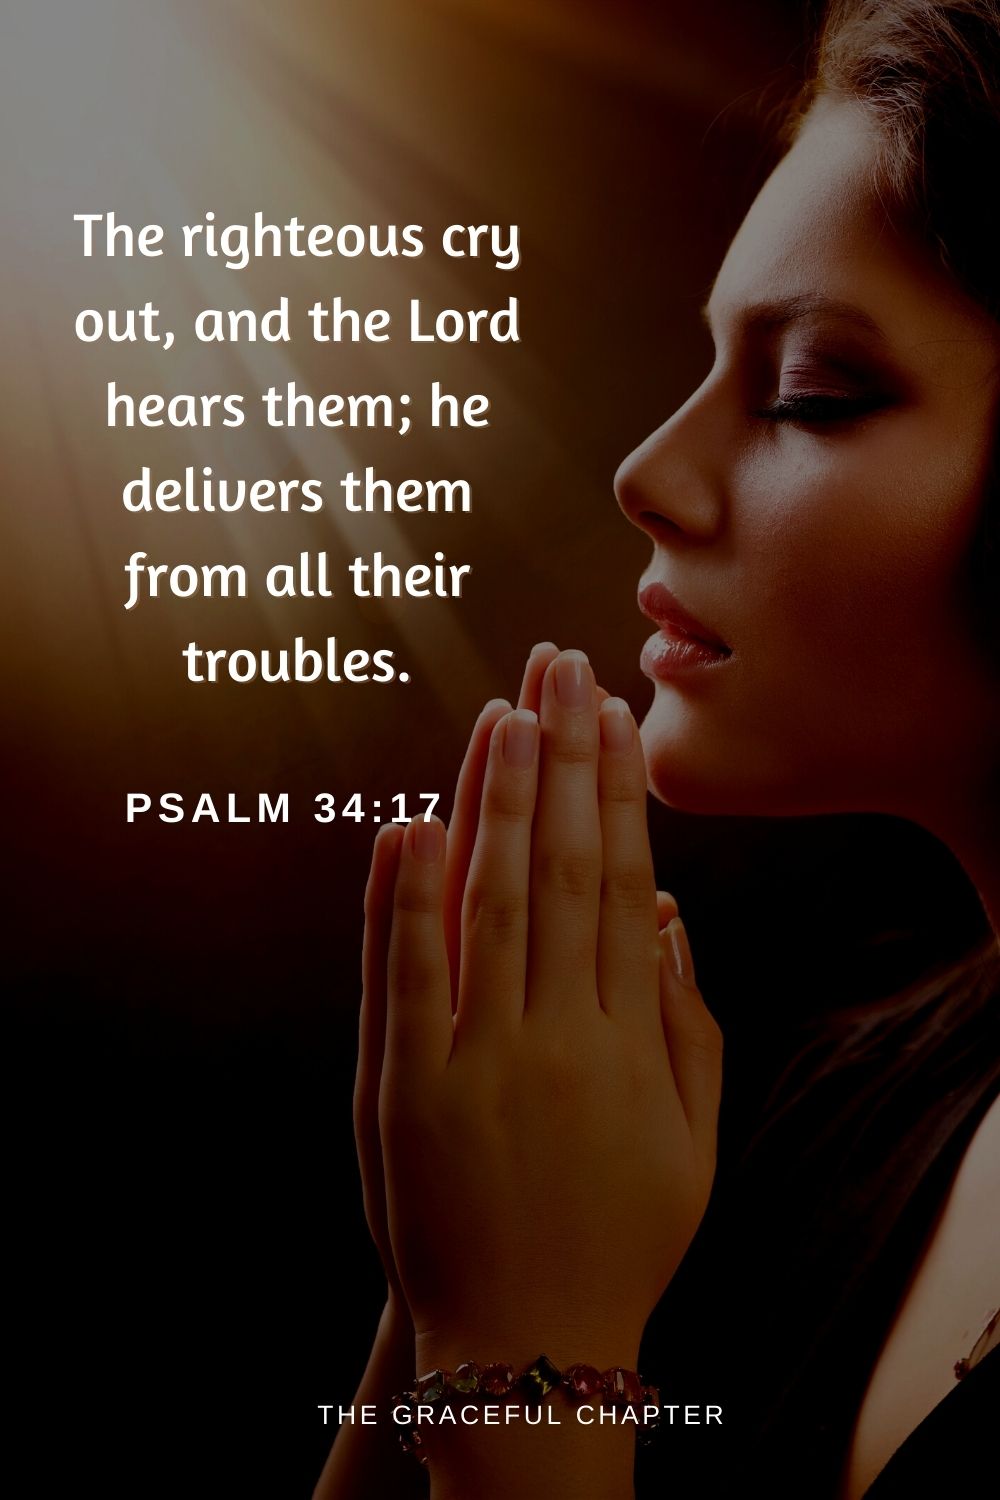 The righteous cry out, and the Lord hears them; he delivers them from all their troubles.